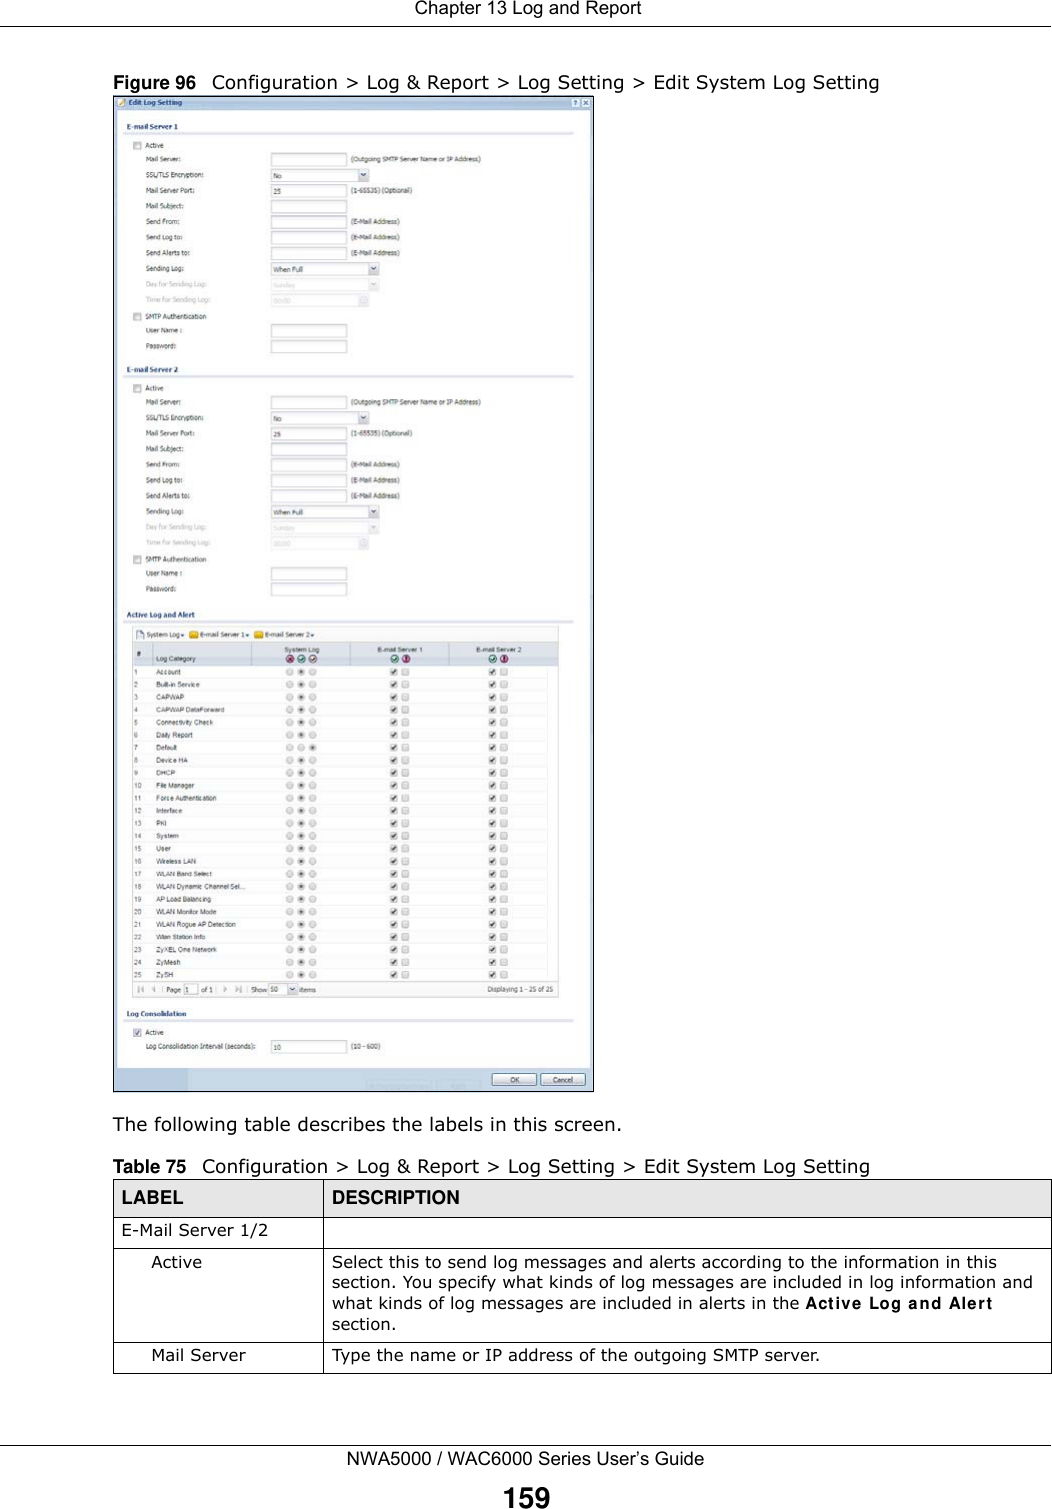  Chapter 13 Log and ReportNWA5000 / WAC6000 Series User’s Guide159Figure 96   Configuration &gt; Log &amp; Report &gt; Log Setting &gt; Edit System Log Setting  The following table describes the labels in this screen. Table 75   Configuration &gt; Log &amp; Report &gt; Log Setting &gt; Edit System Log SettingLABEL DESCRIPTIONE-Mail Server 1/2Active Select this to send log messages and alerts according to the information in this section. You specify what kinds of log messages are included in log information and what kinds of log messages are included in alerts in the Act ive  Log and Aler t  section.Mail Server Type the name or IP address of the outgoing SMTP server.